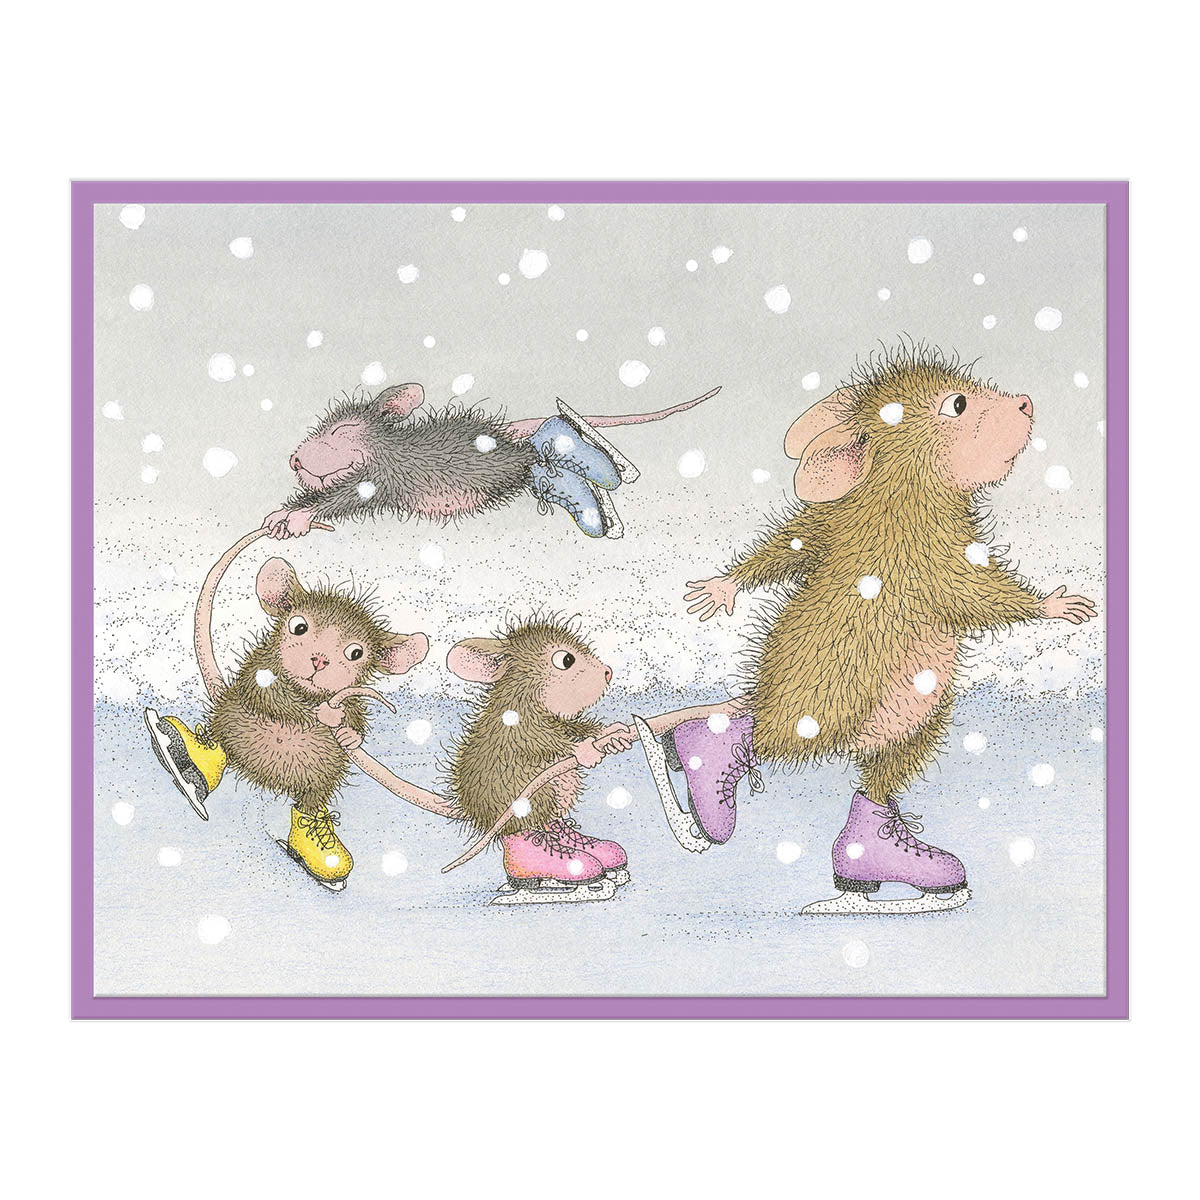 Hold On! Cling Rubber Stamp Set from the House-Mouse Holiday Collection